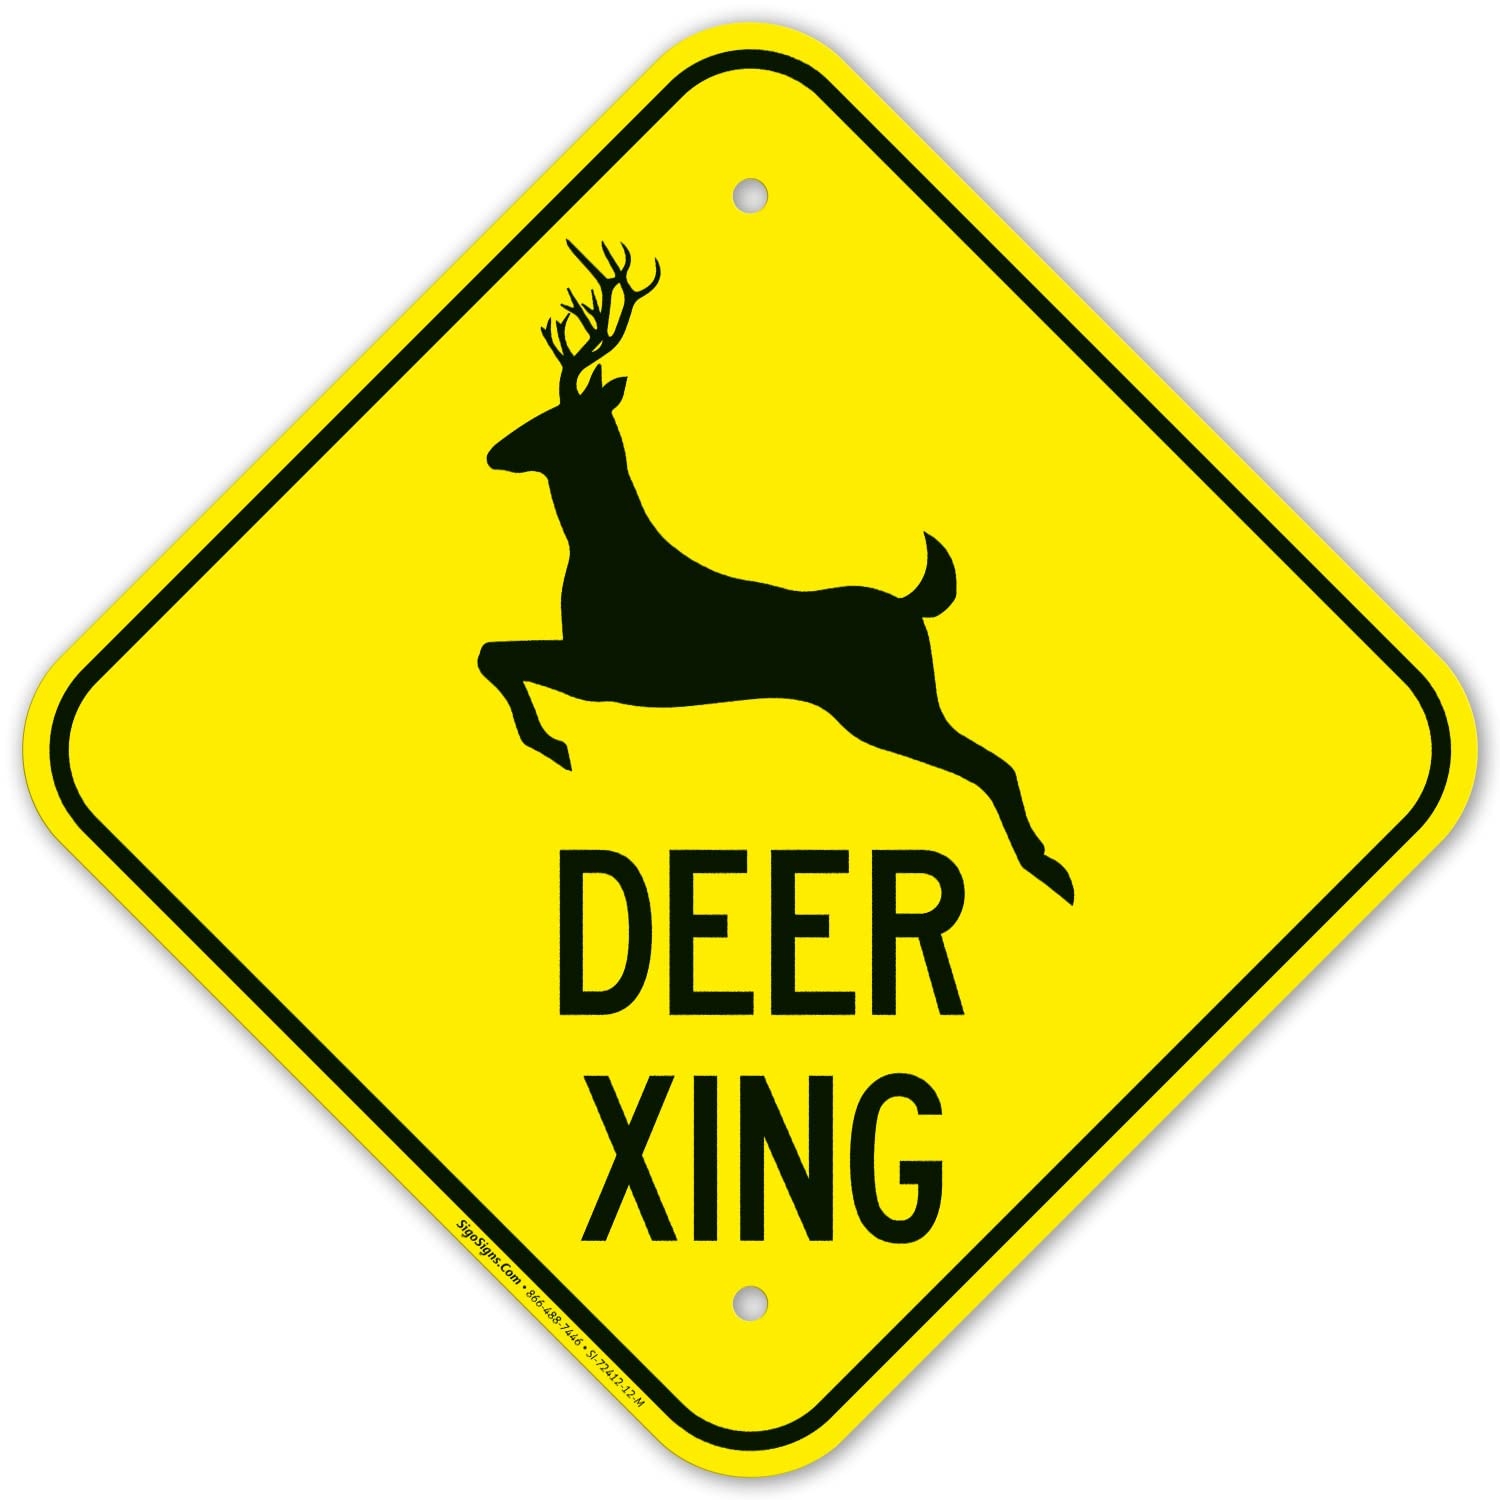 Amazon Deer Crossing With Graphic Sign 12x12 Inches Rust Free 040 Aluminum Fade Resistant Made In USA By Sigo Signs Patio Lawn Garden